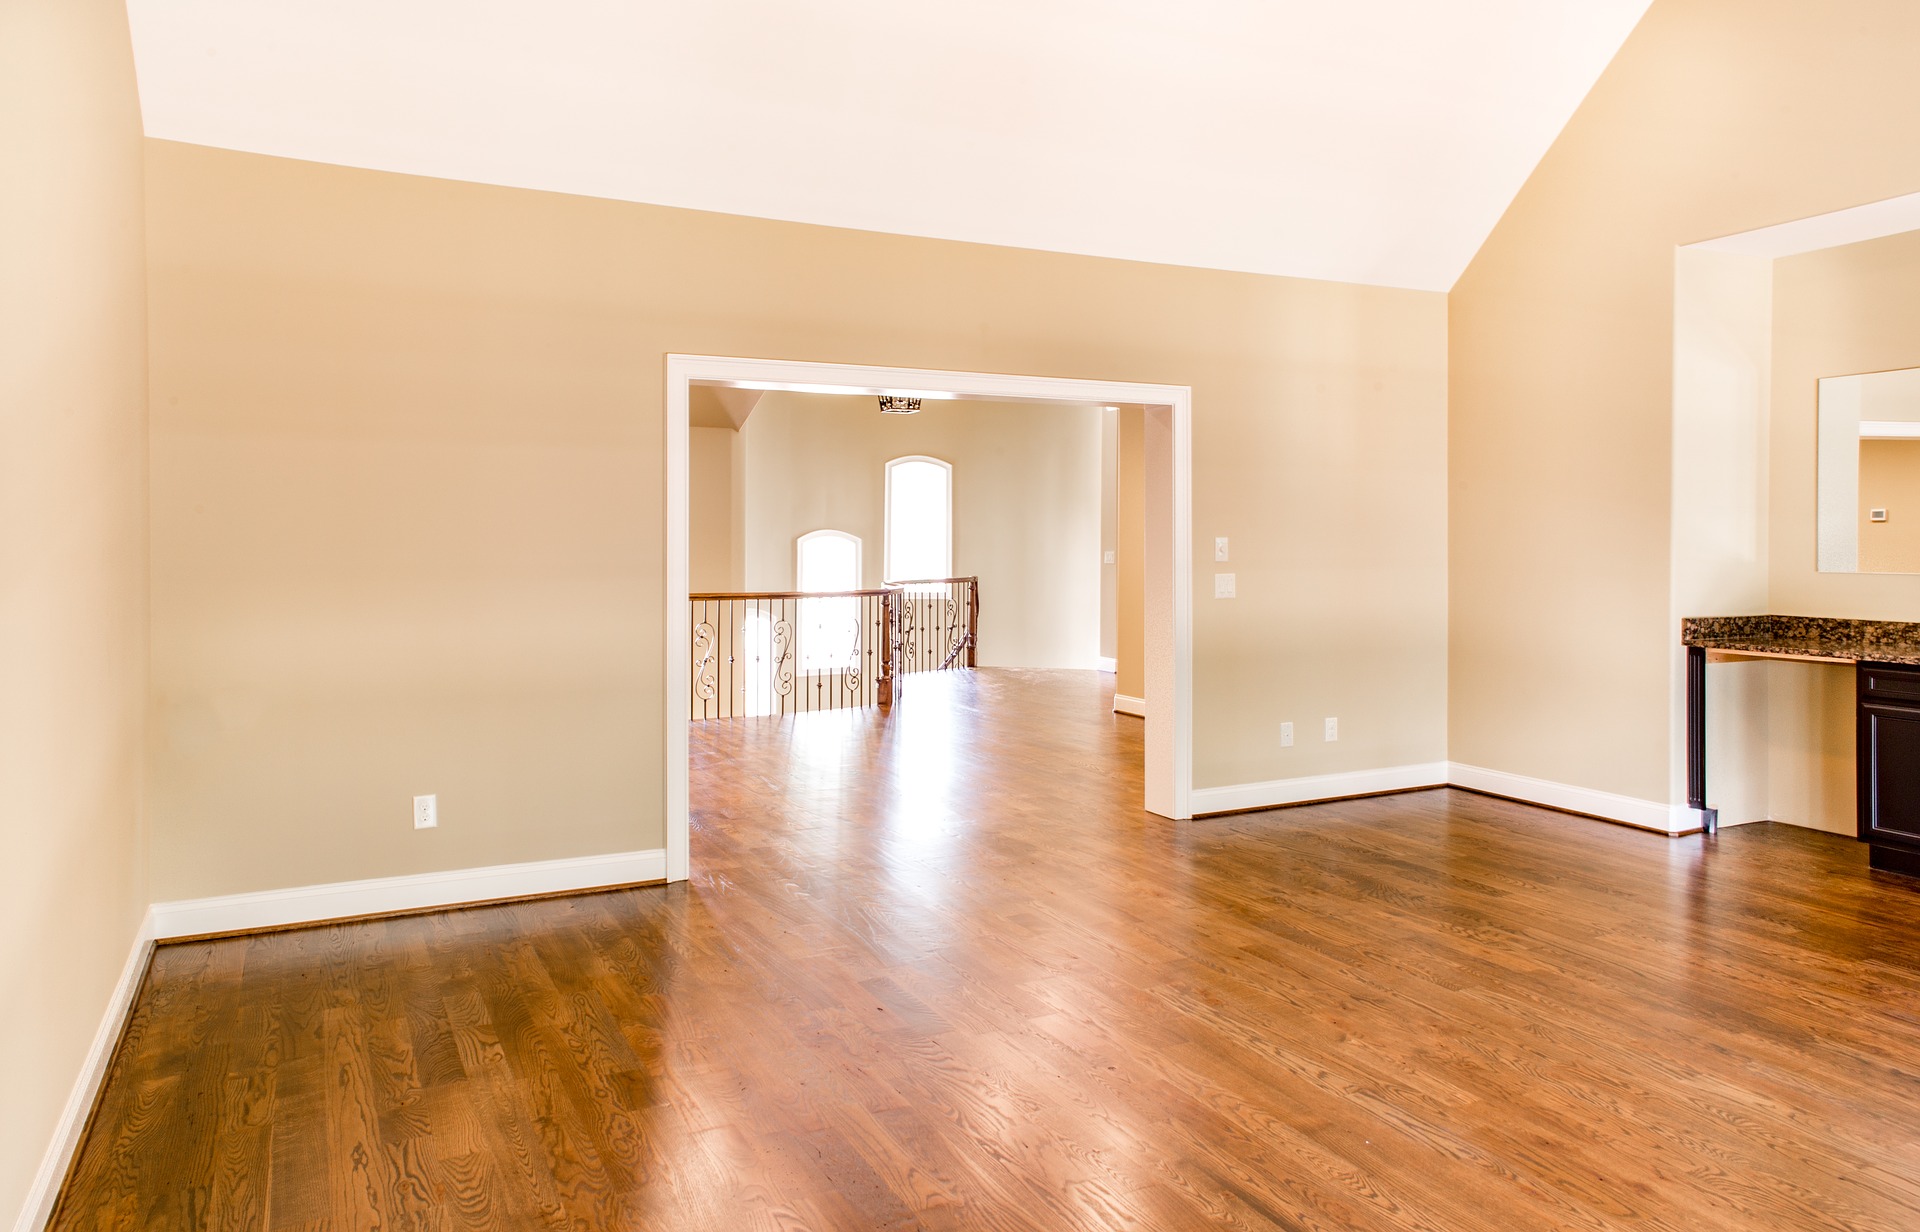 Flooring Patterns Directions And, Hardwood Floor Layout